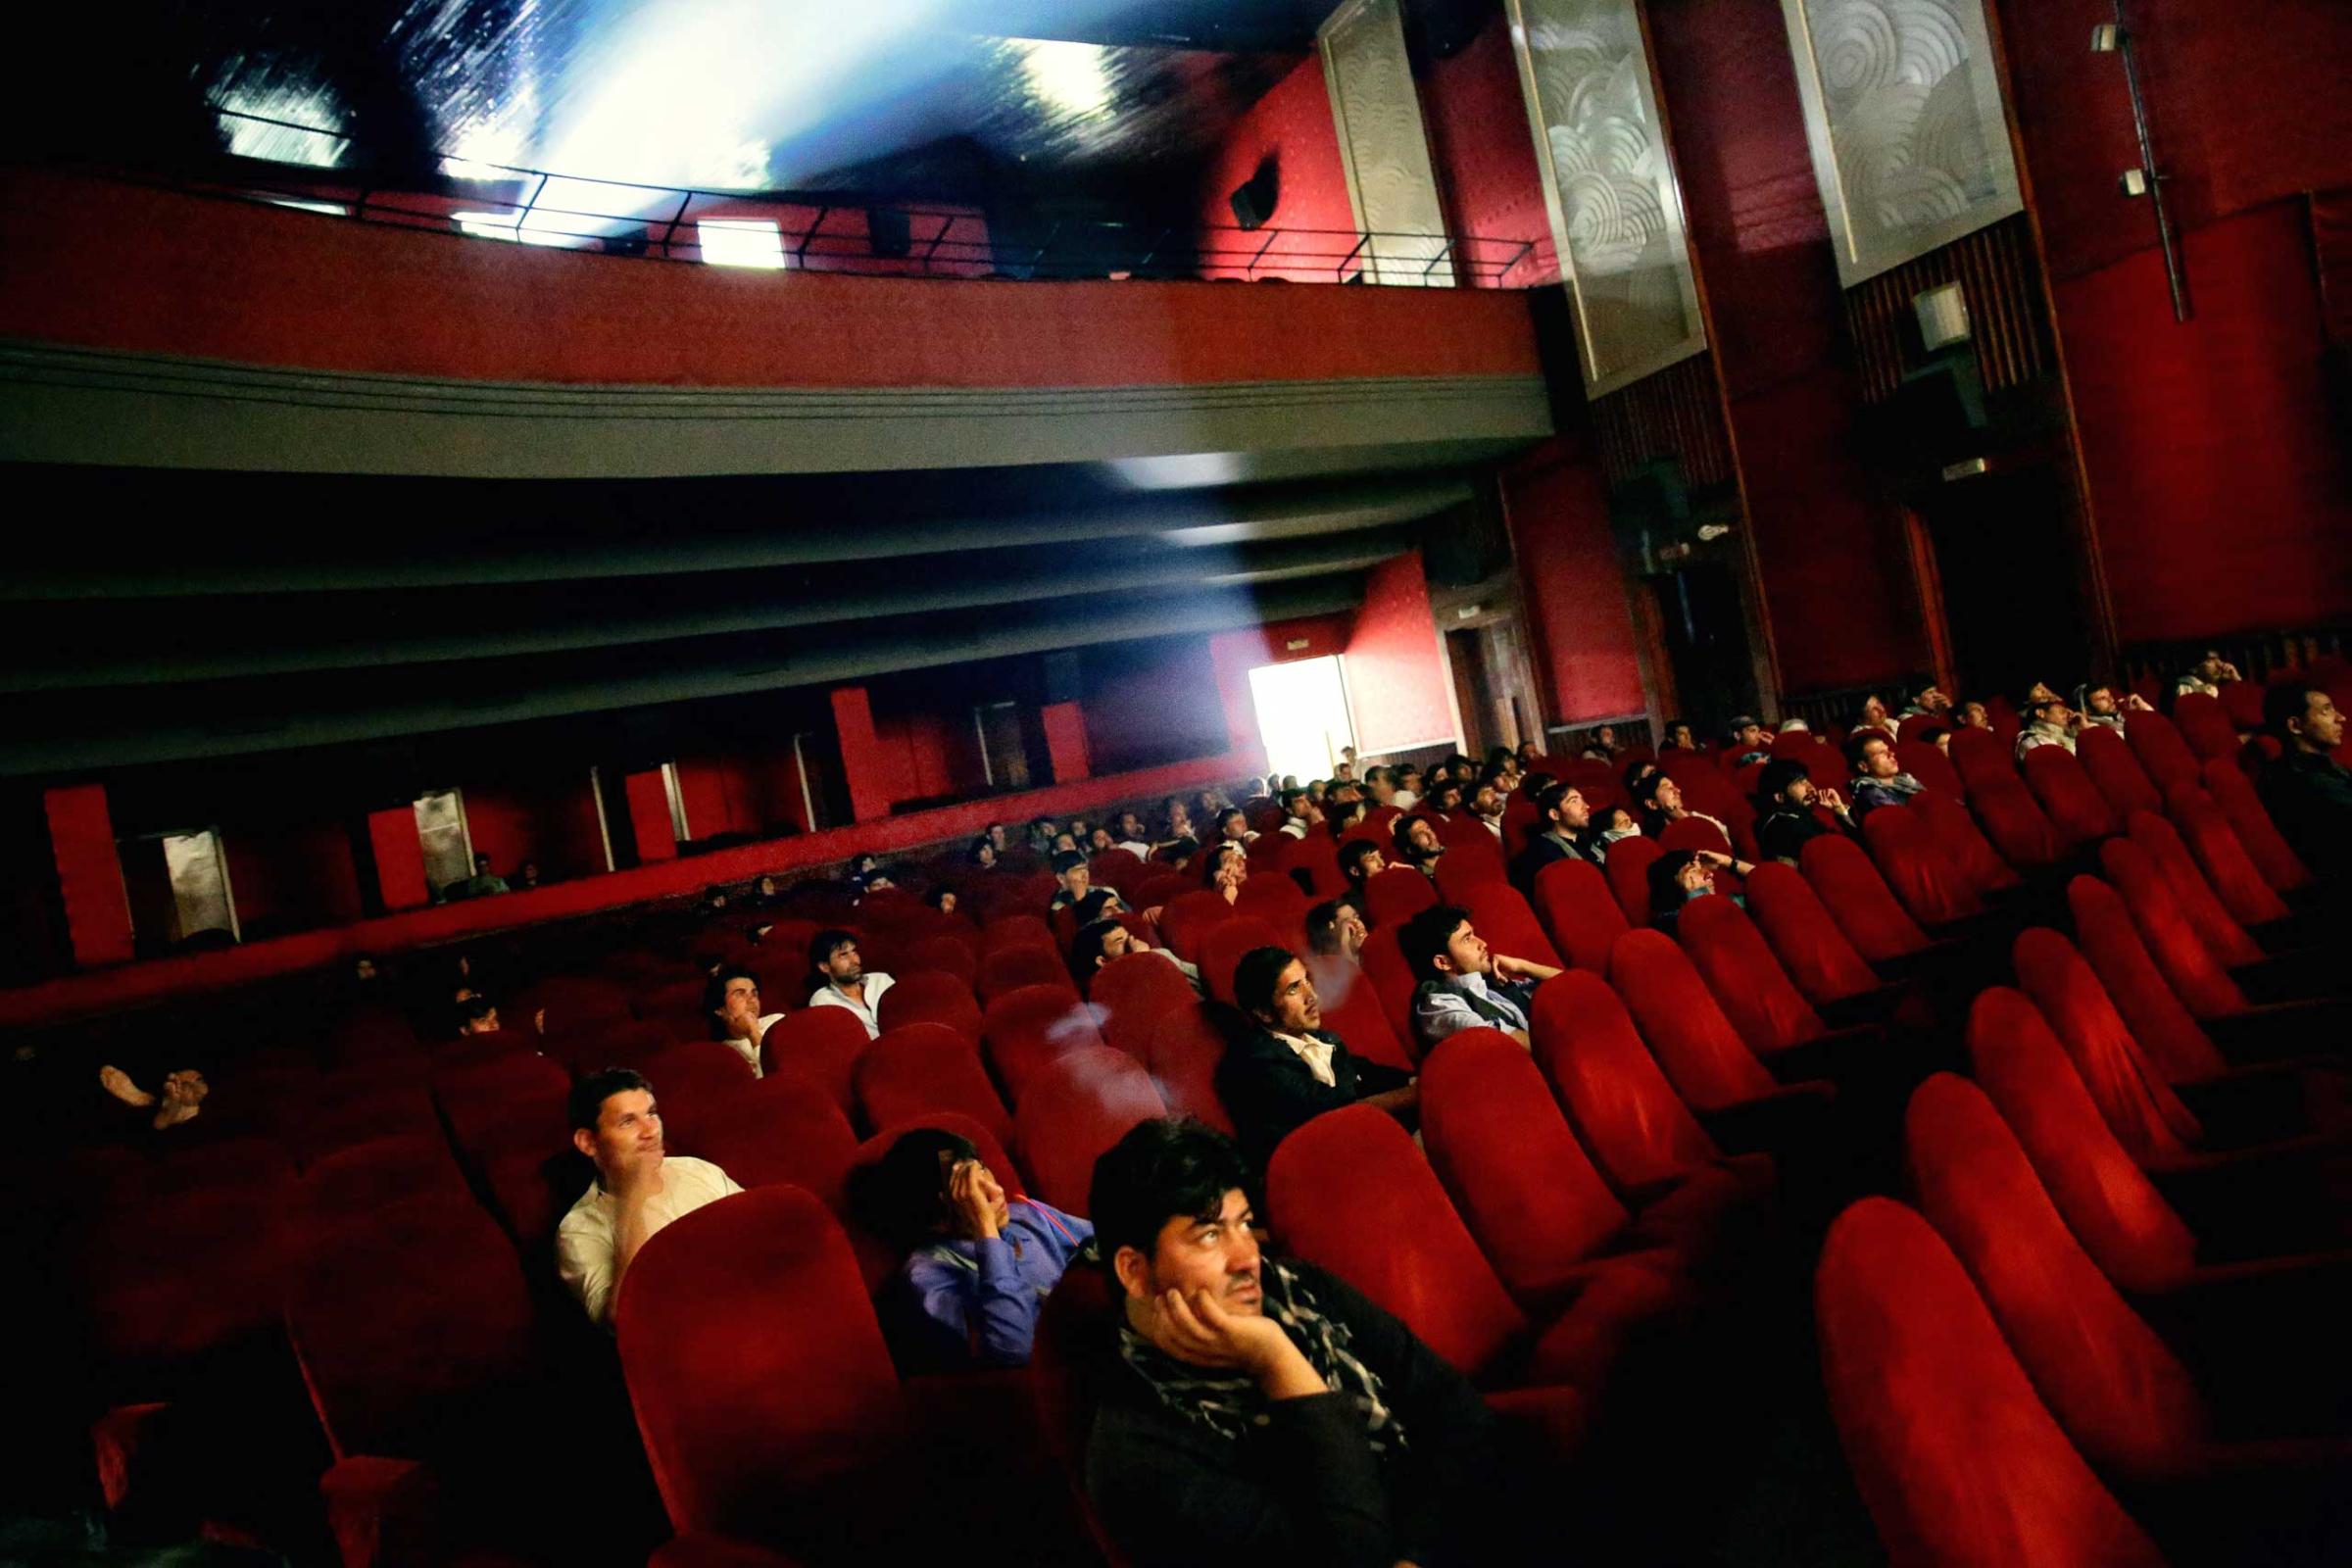 Young men smoke hashish and watch a Bollywood film at the recently refurbished Cinema Ariana in central Kabul on Aug. 18, 2014.